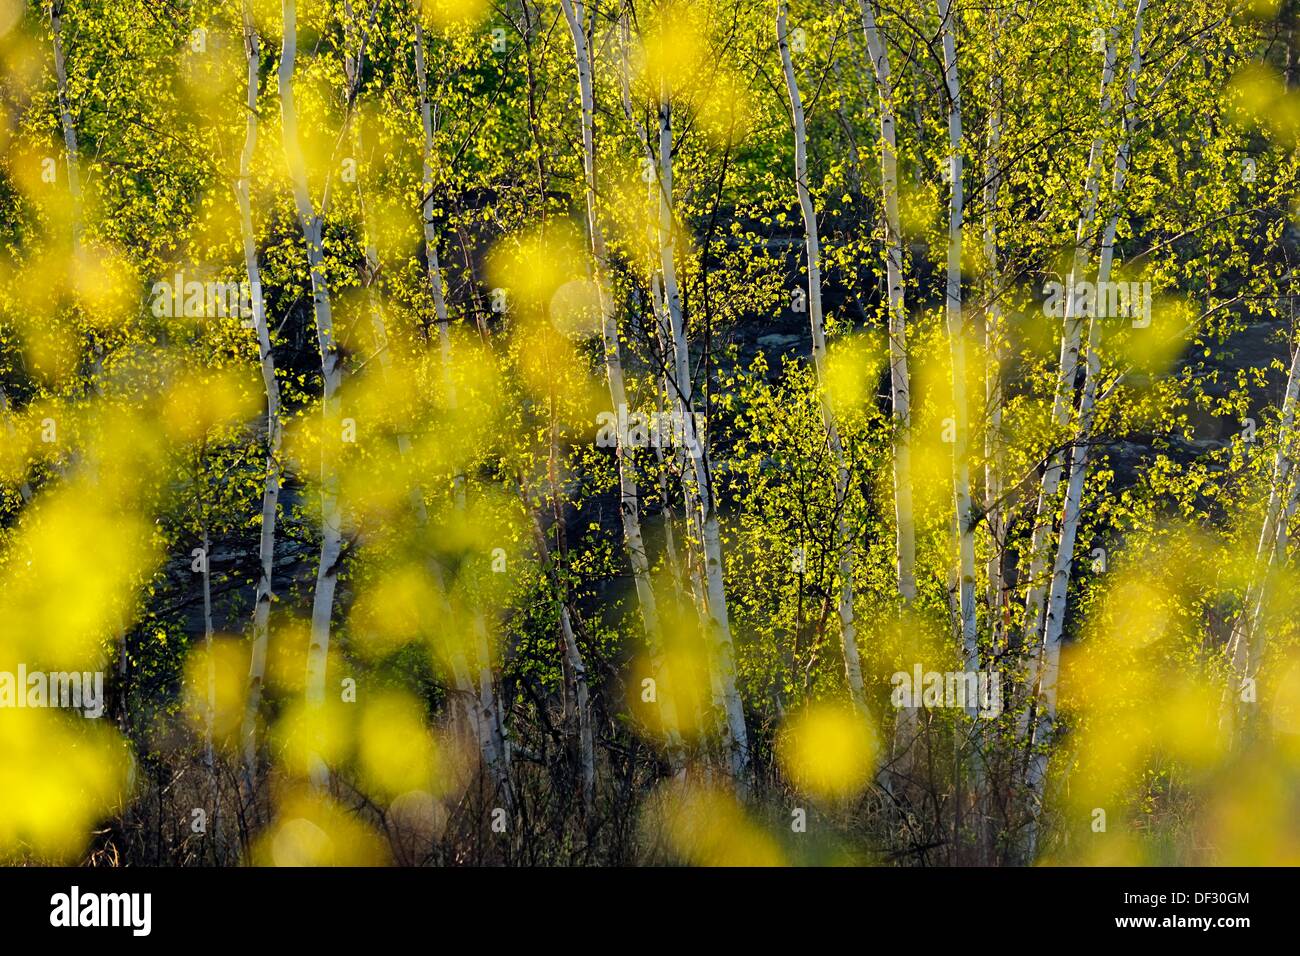 Birch trees and out of focus birch leaves Stock Photo